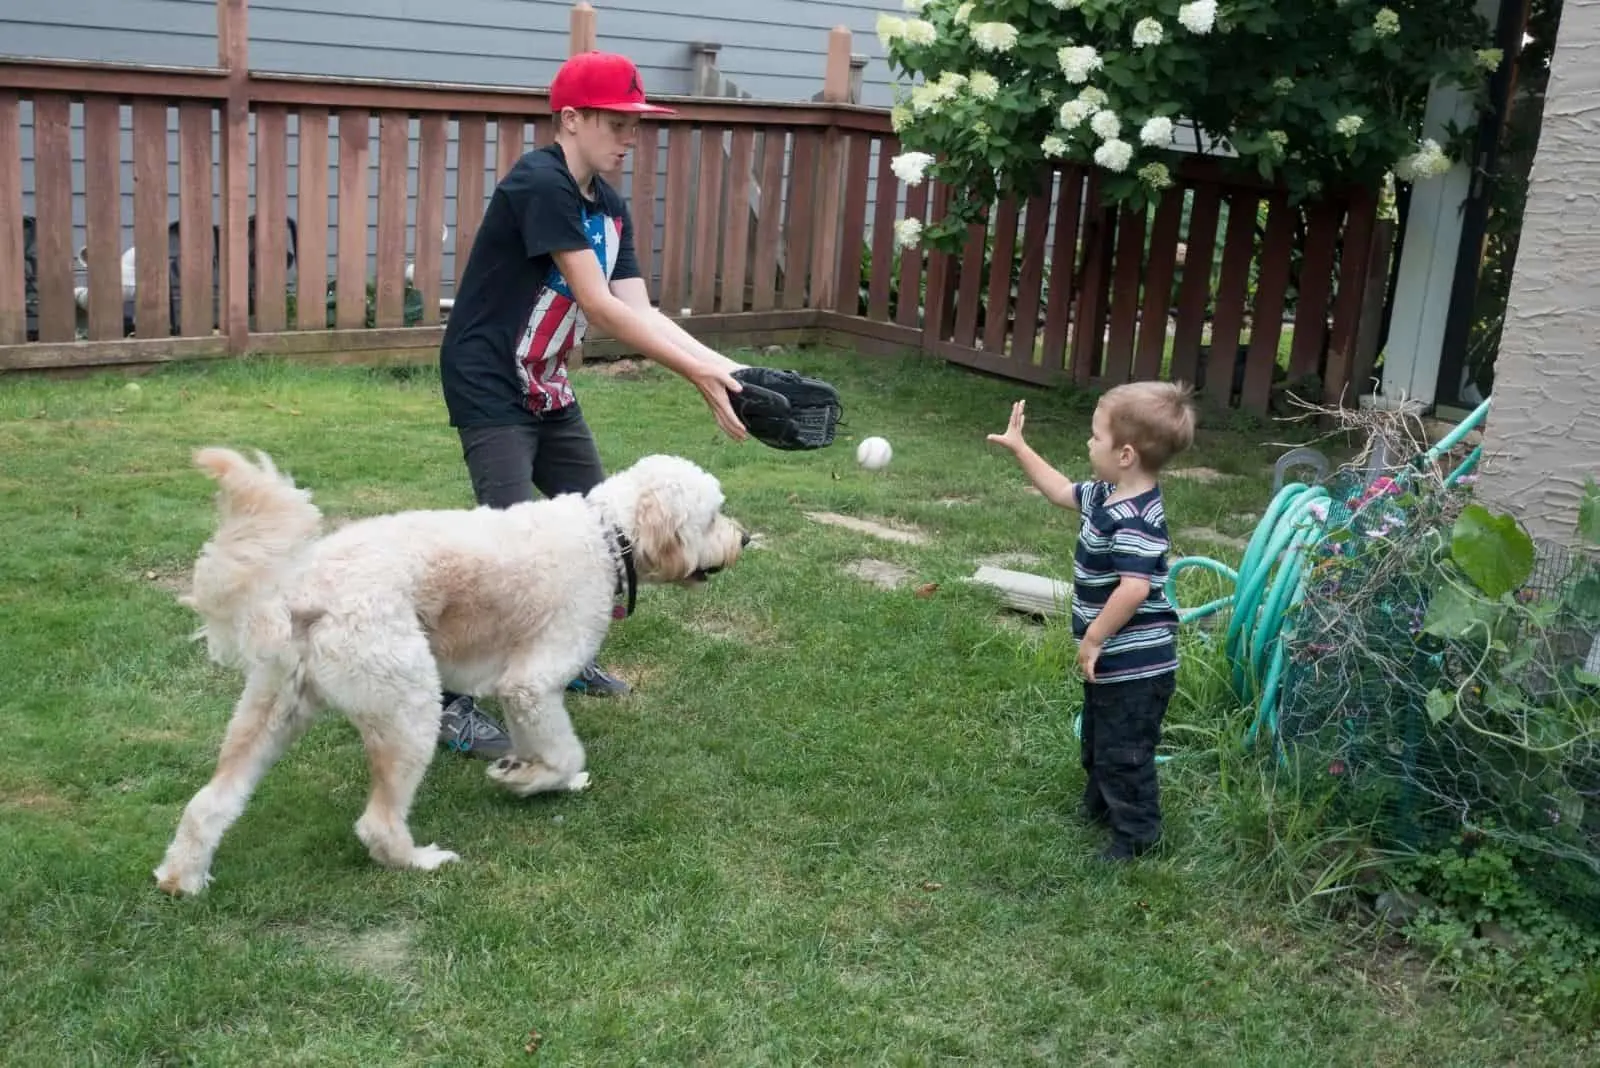 kids playing baseball with the goldendoodle dog in the backyard